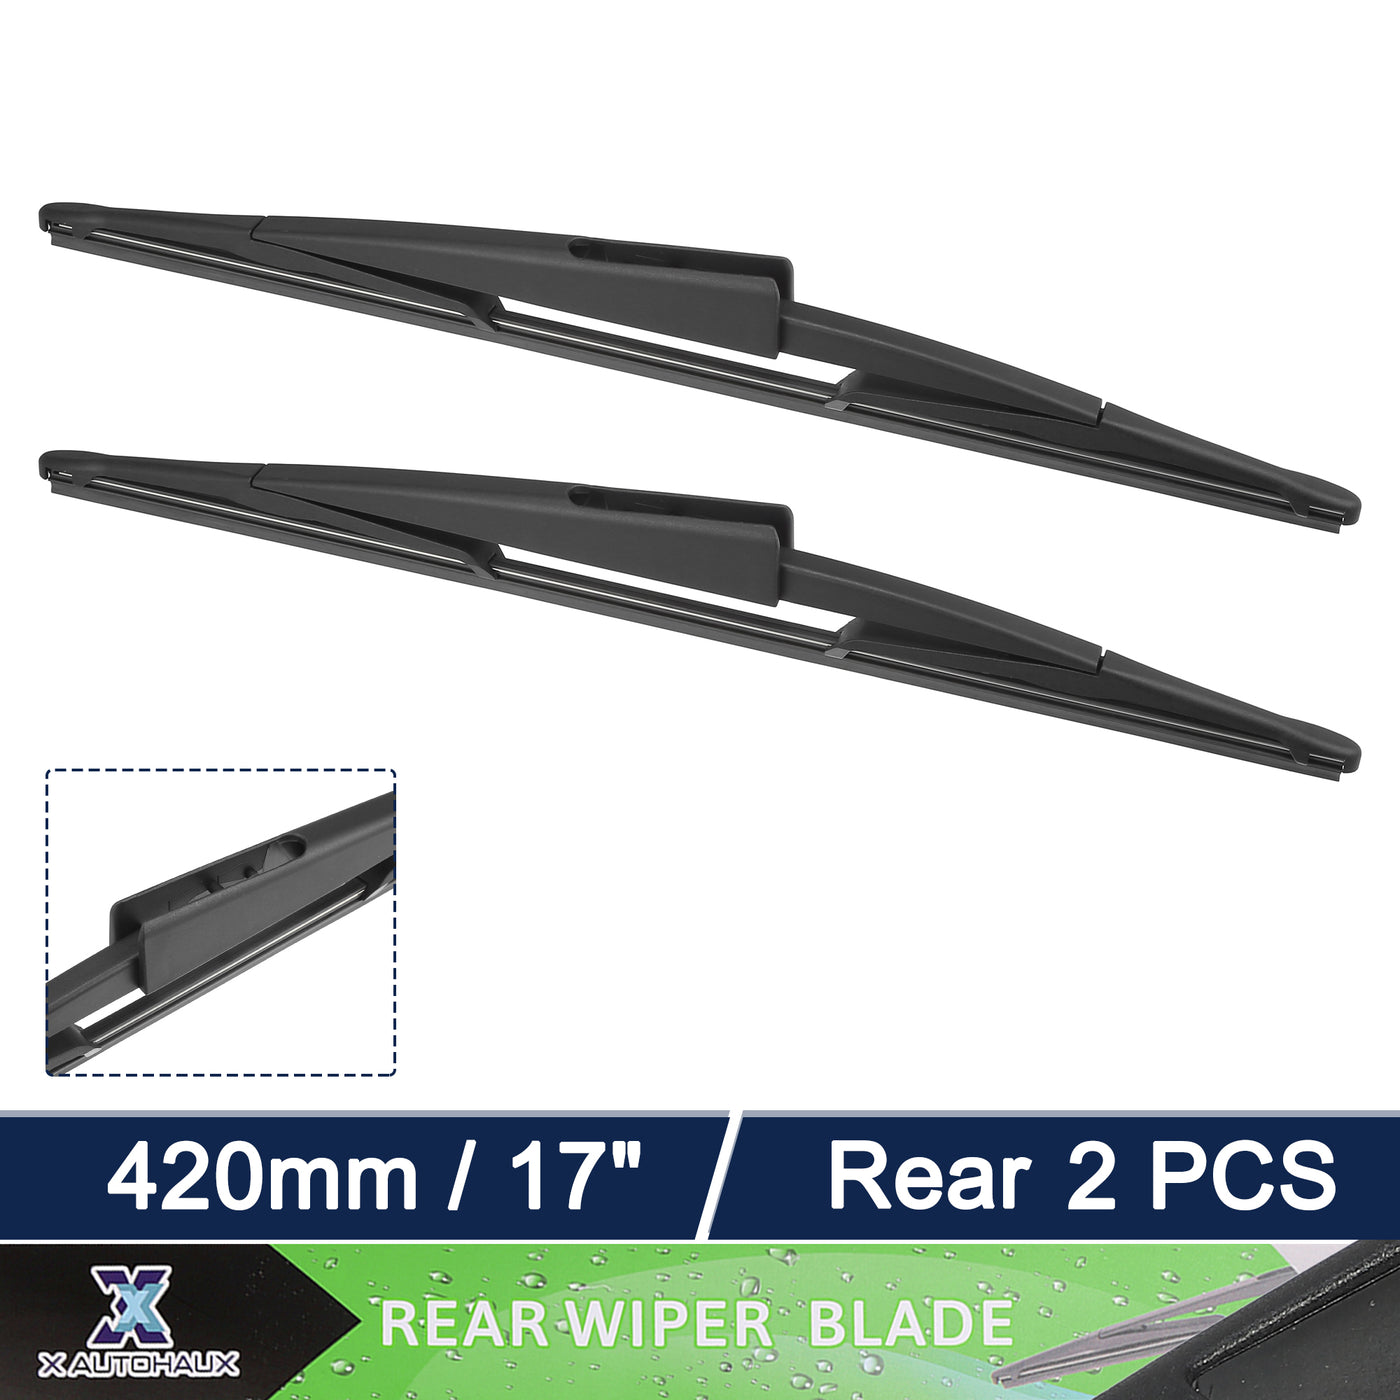 X AUTOHAUX 2pcs Rear Windshield Wiper Blade Replacement for Ford Expedition 2012-2015 for Lincoln Navigator 2009-2016